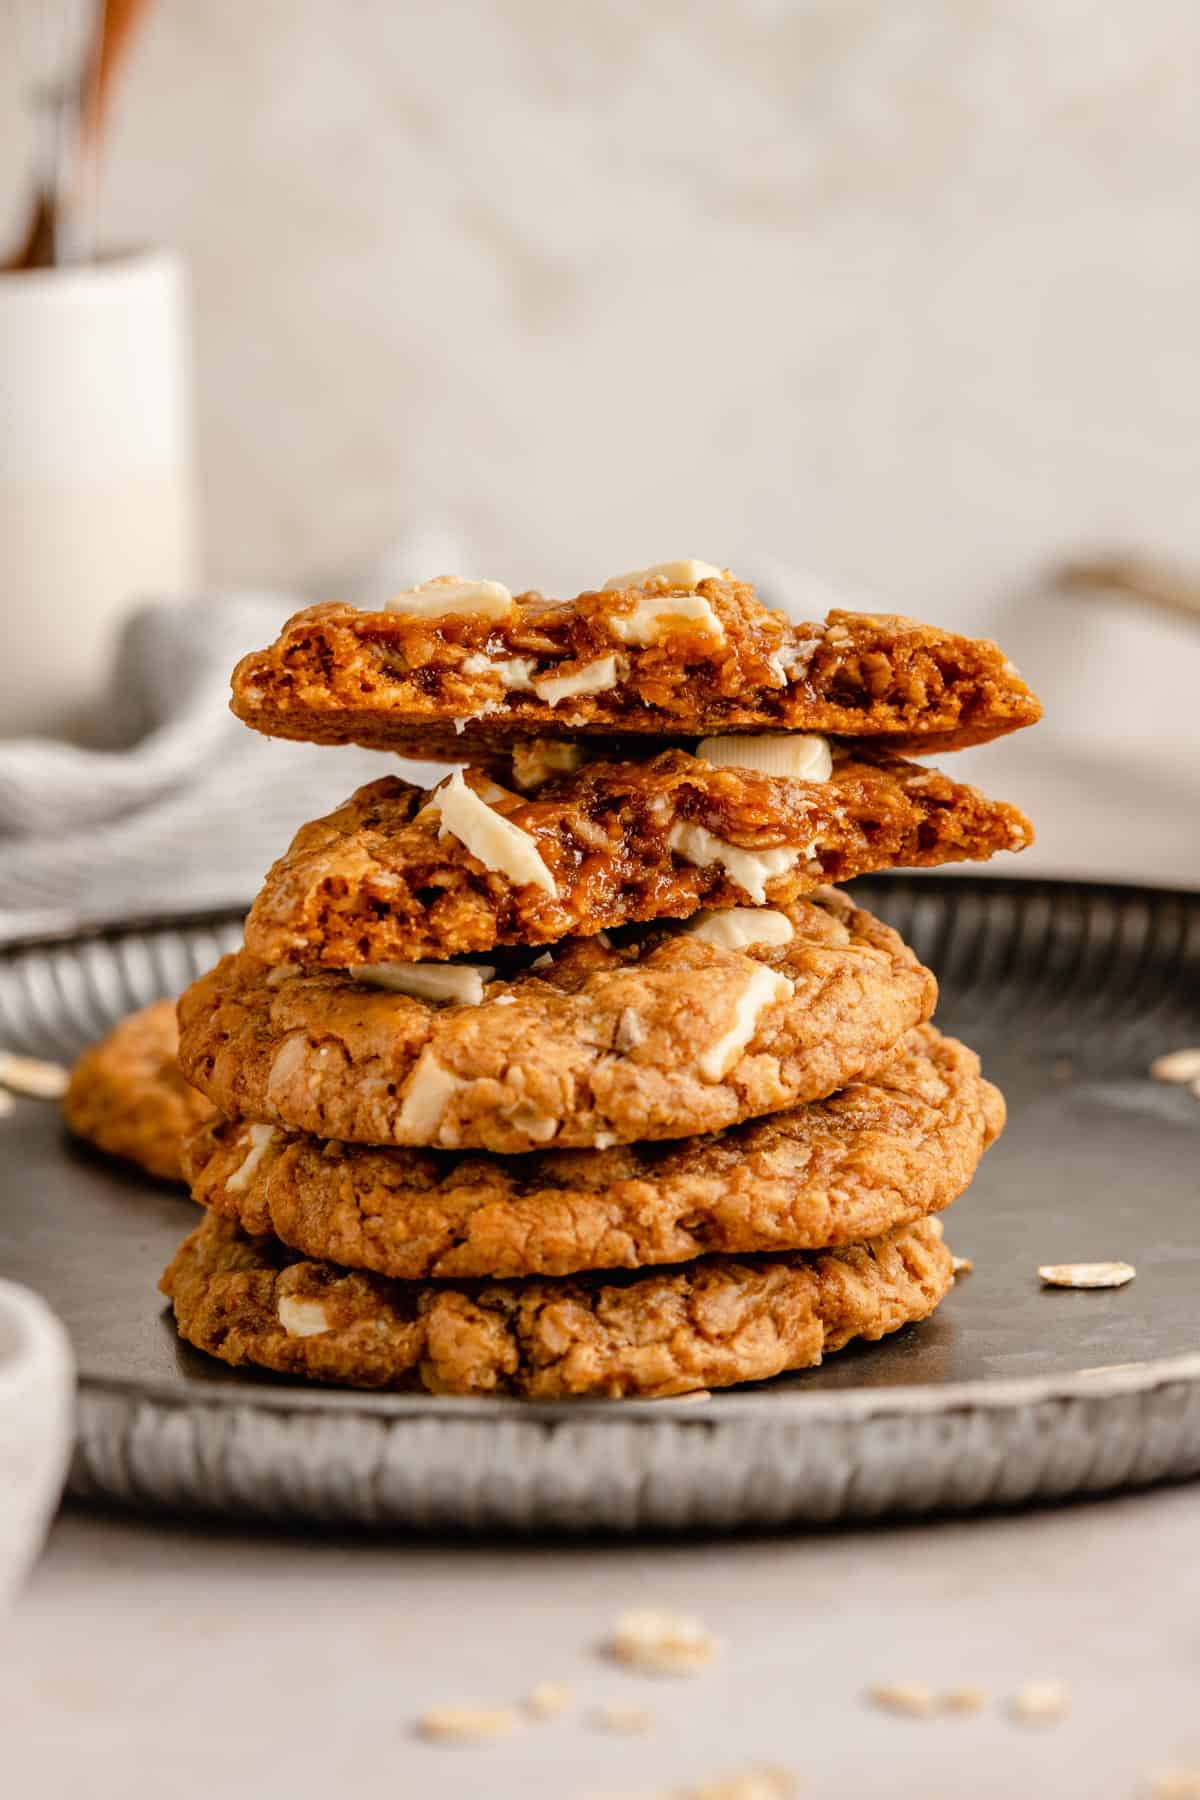 Biscoff cookies in a stack on a plate with one broken in half showing gooey insides